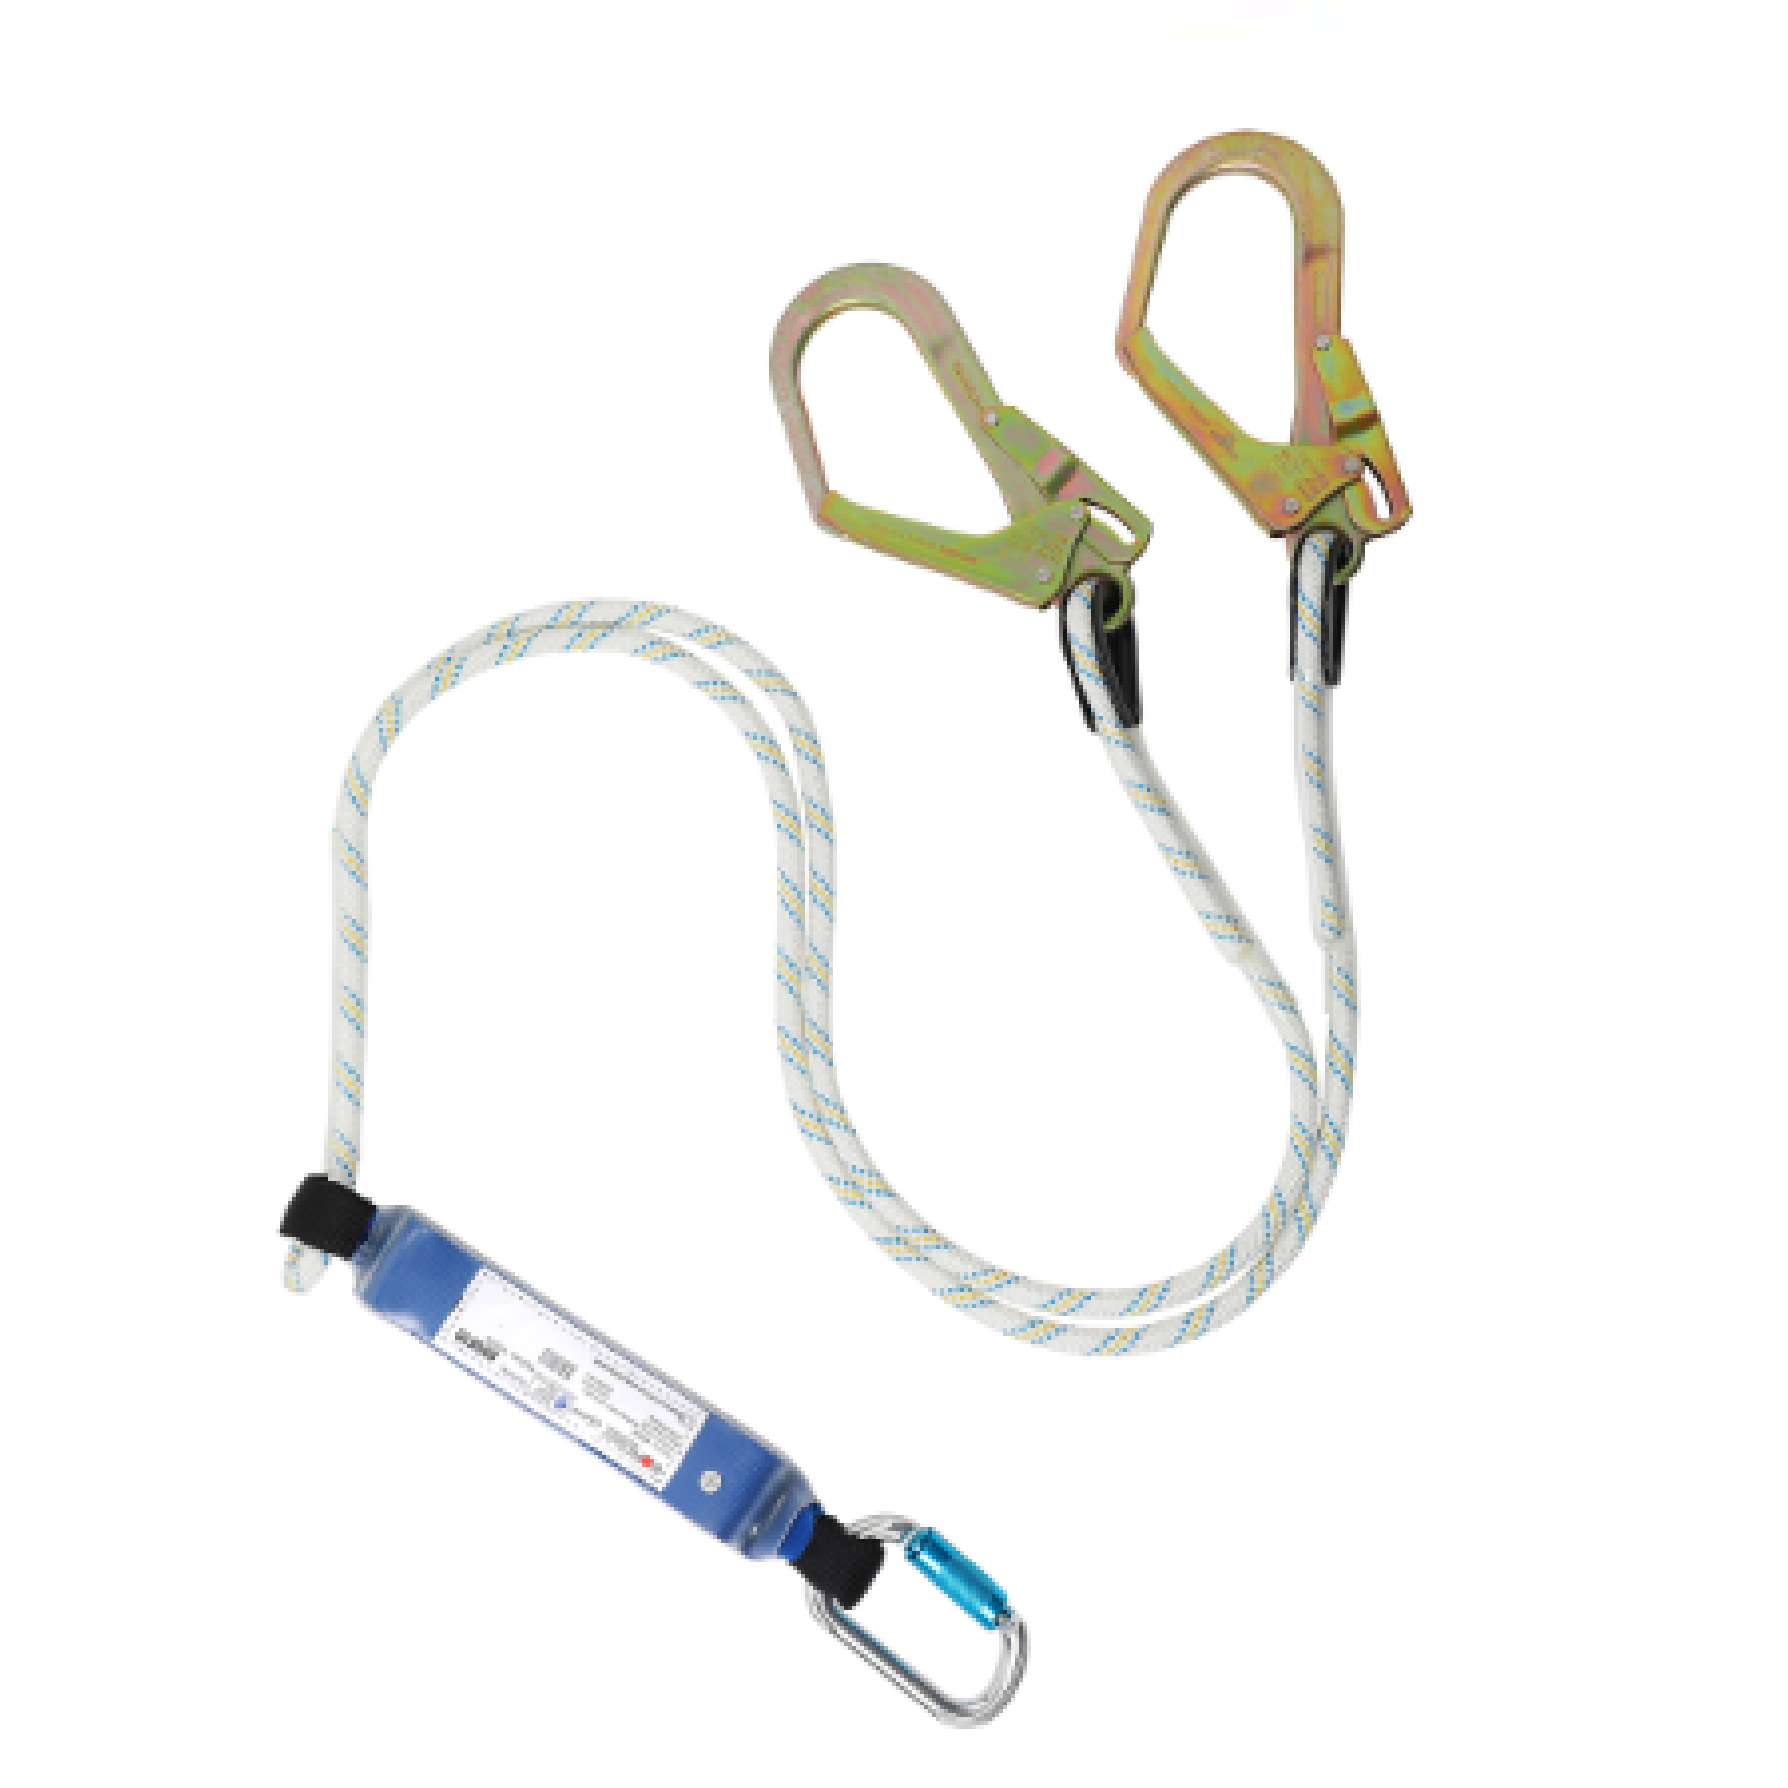 Worksafe WSF222 ENERGY ABSORBER Double Rope Safety Lanyard